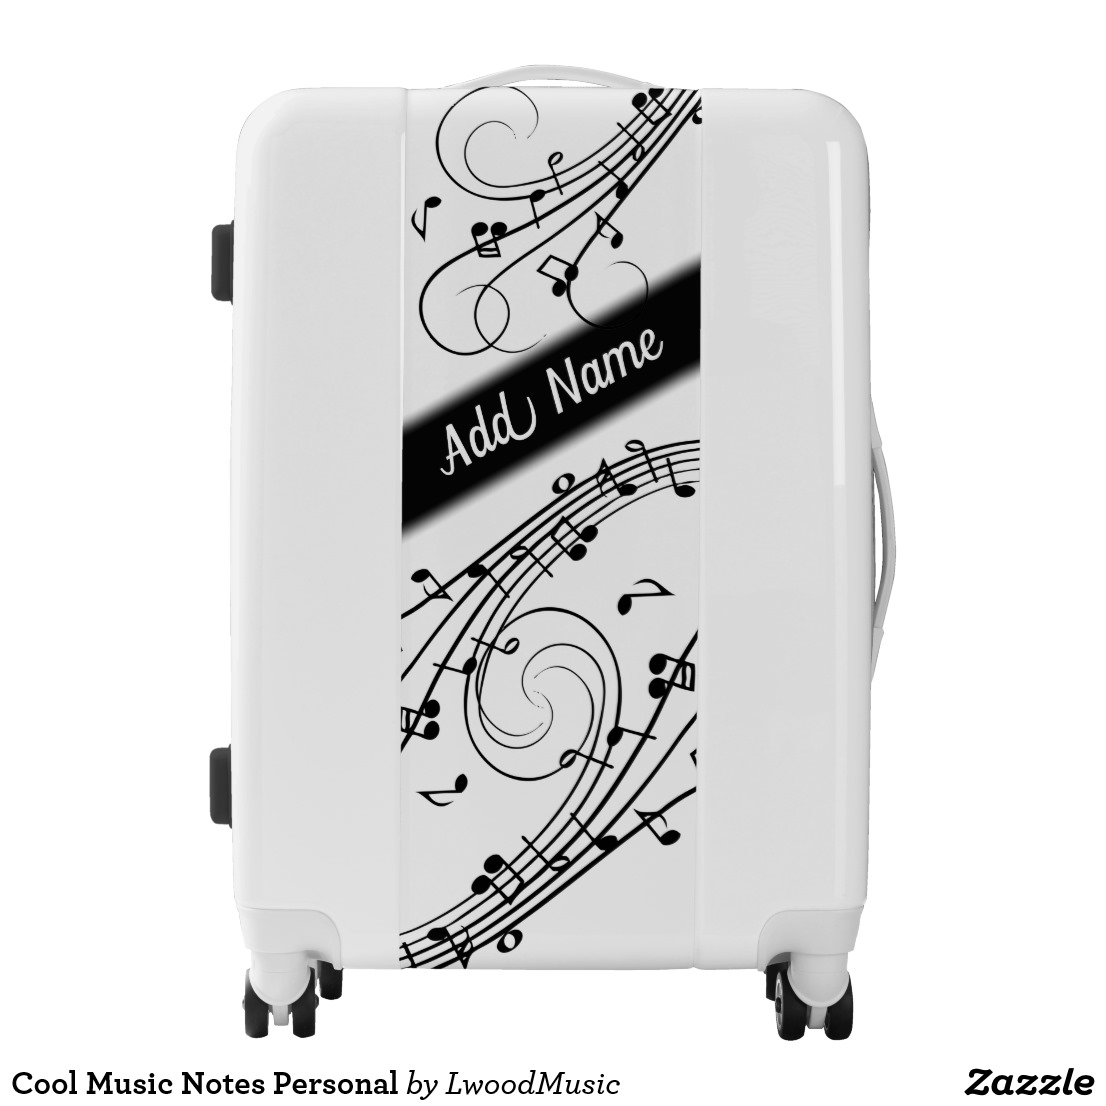 Cool Music Notes Personal Luggage